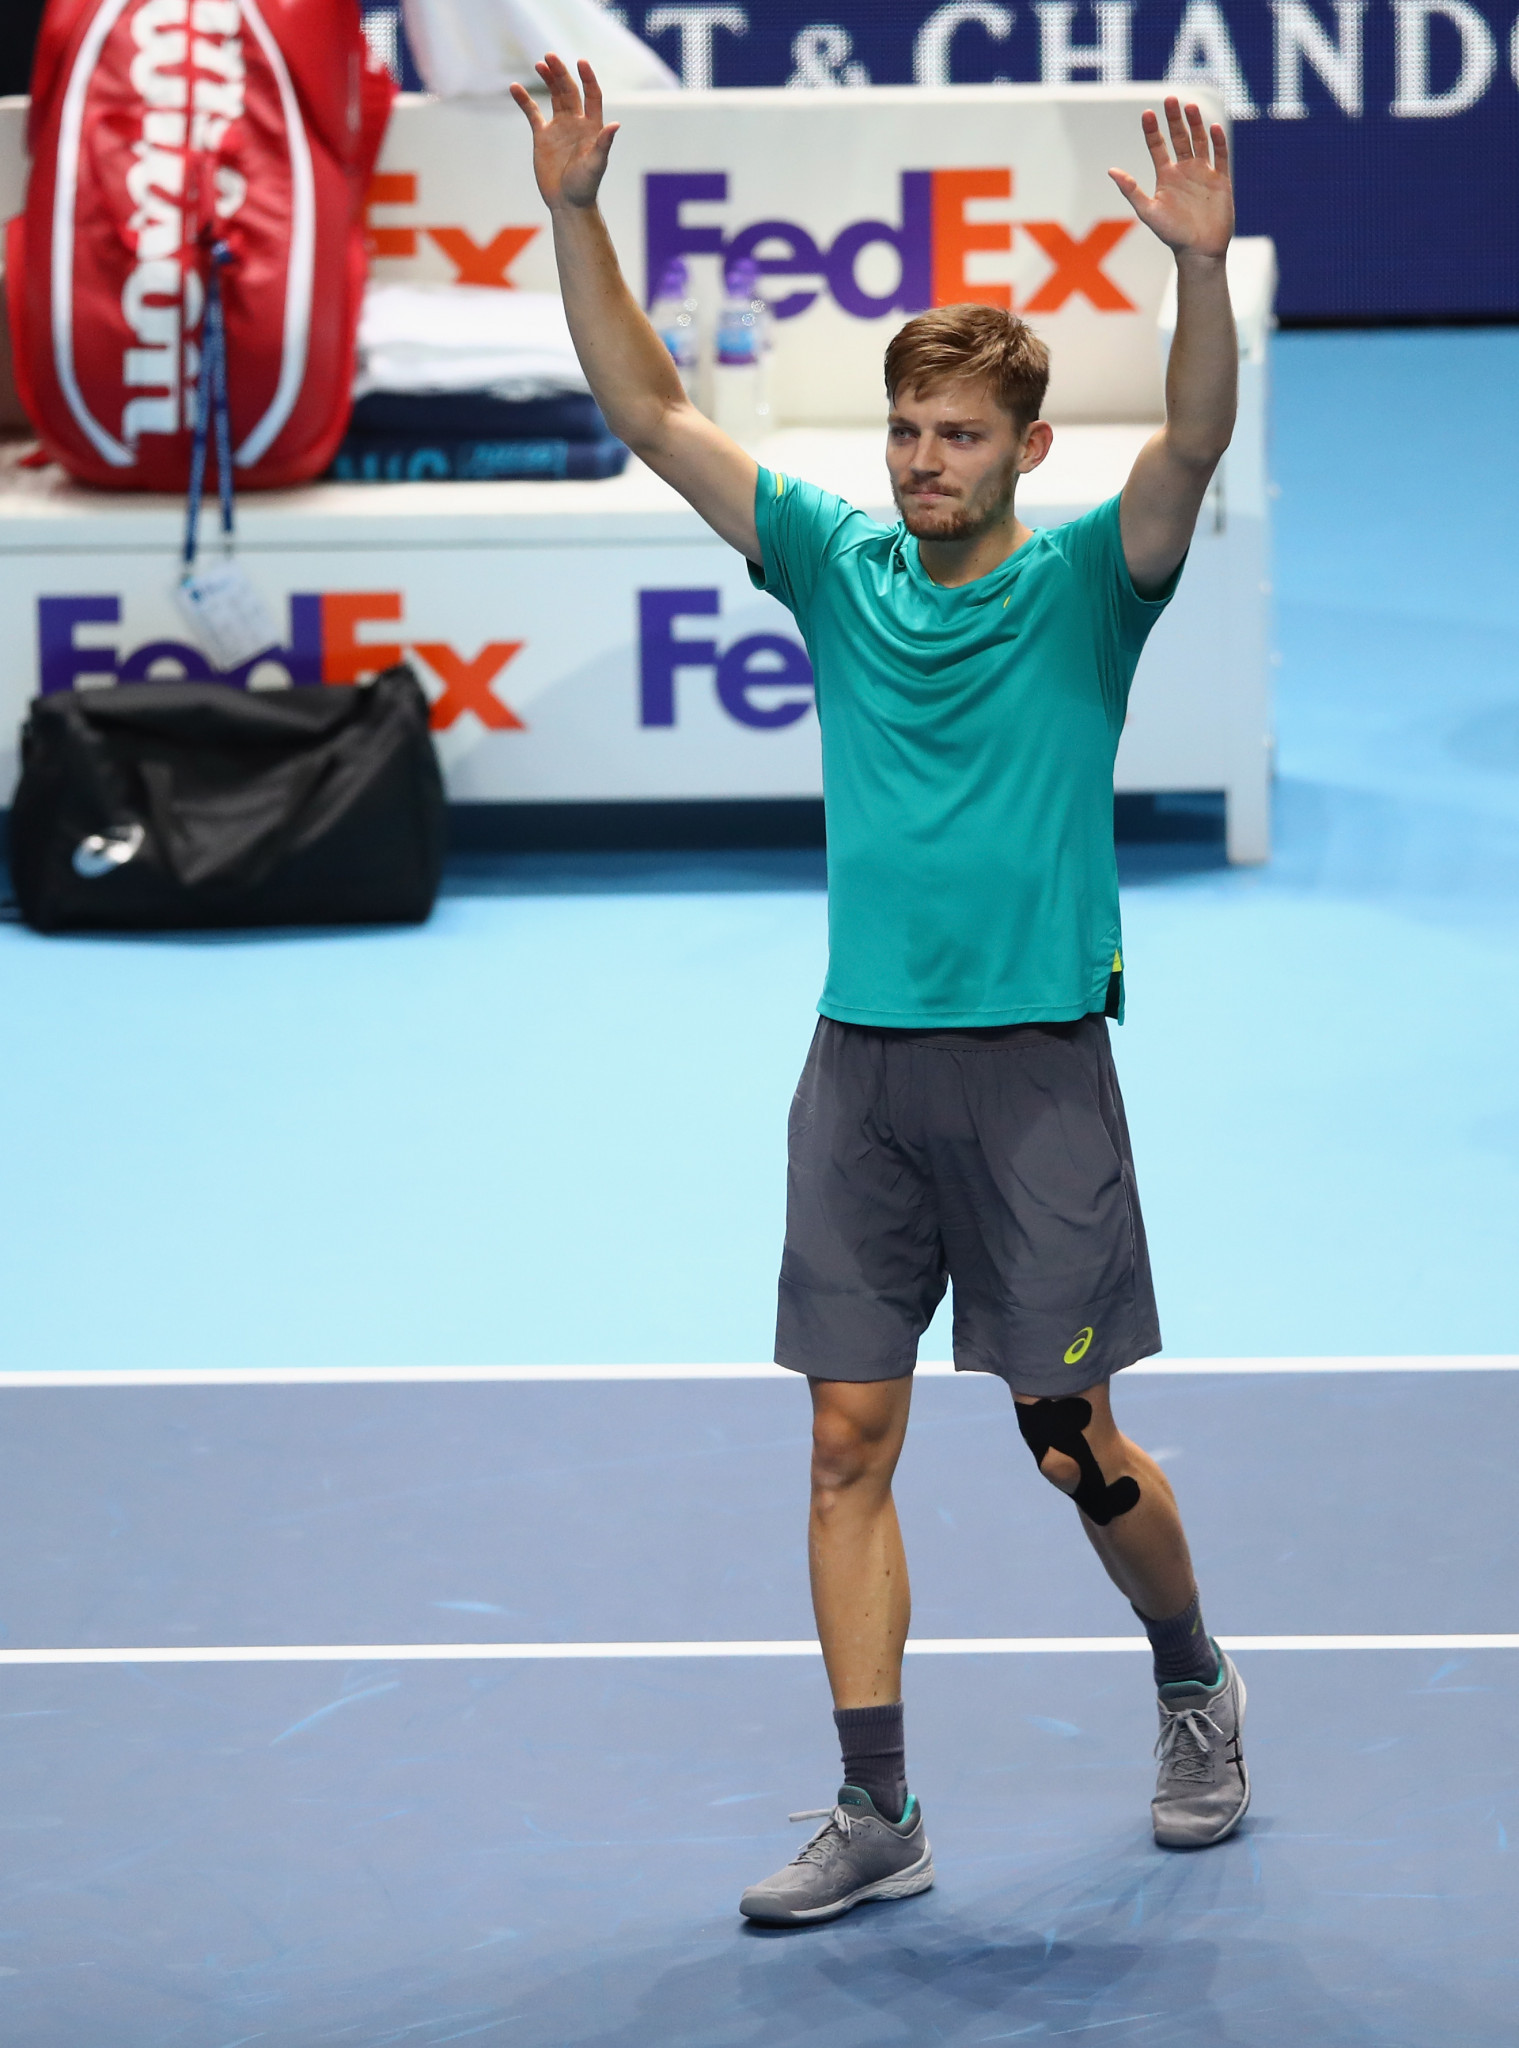 Shock win over Federer earns Goffin final place against Dimitrov at ATP World Tour Finals